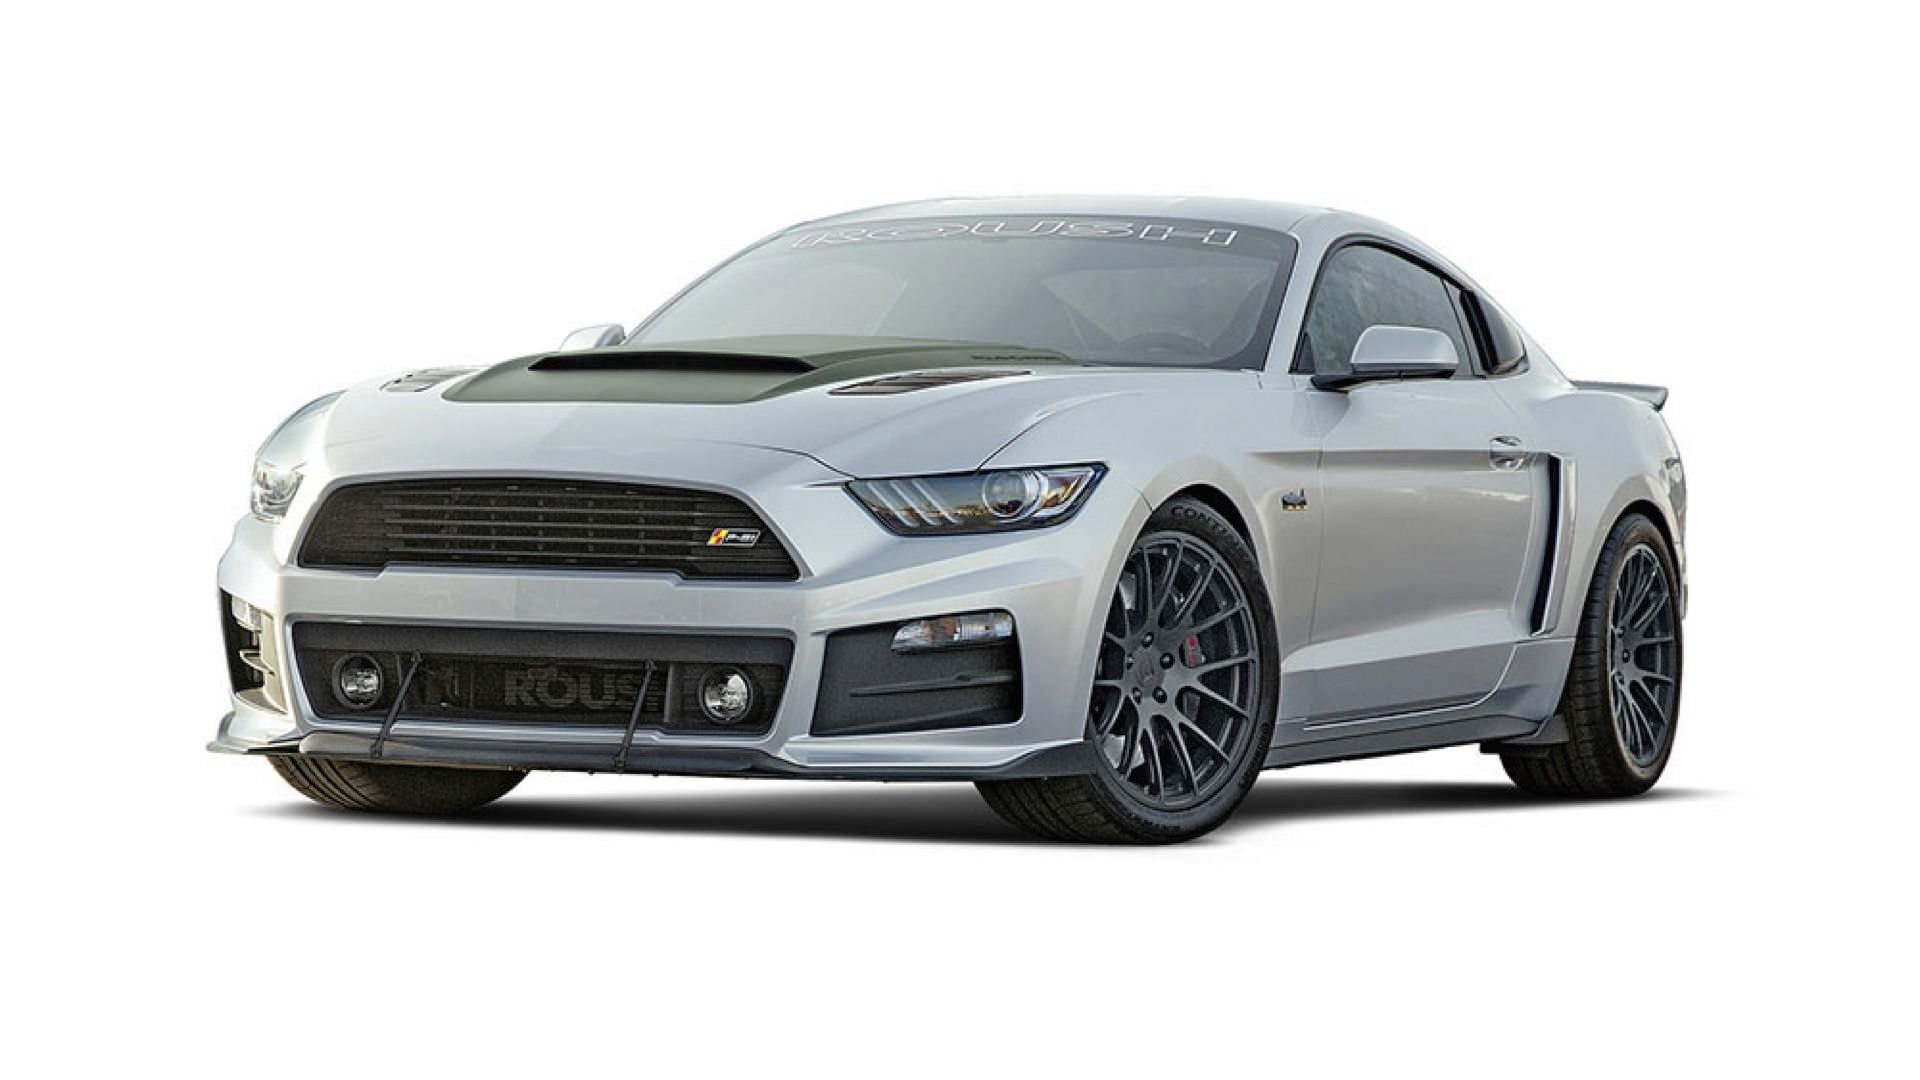 2017 Ford Mustang GT P-51 by Roush Performance